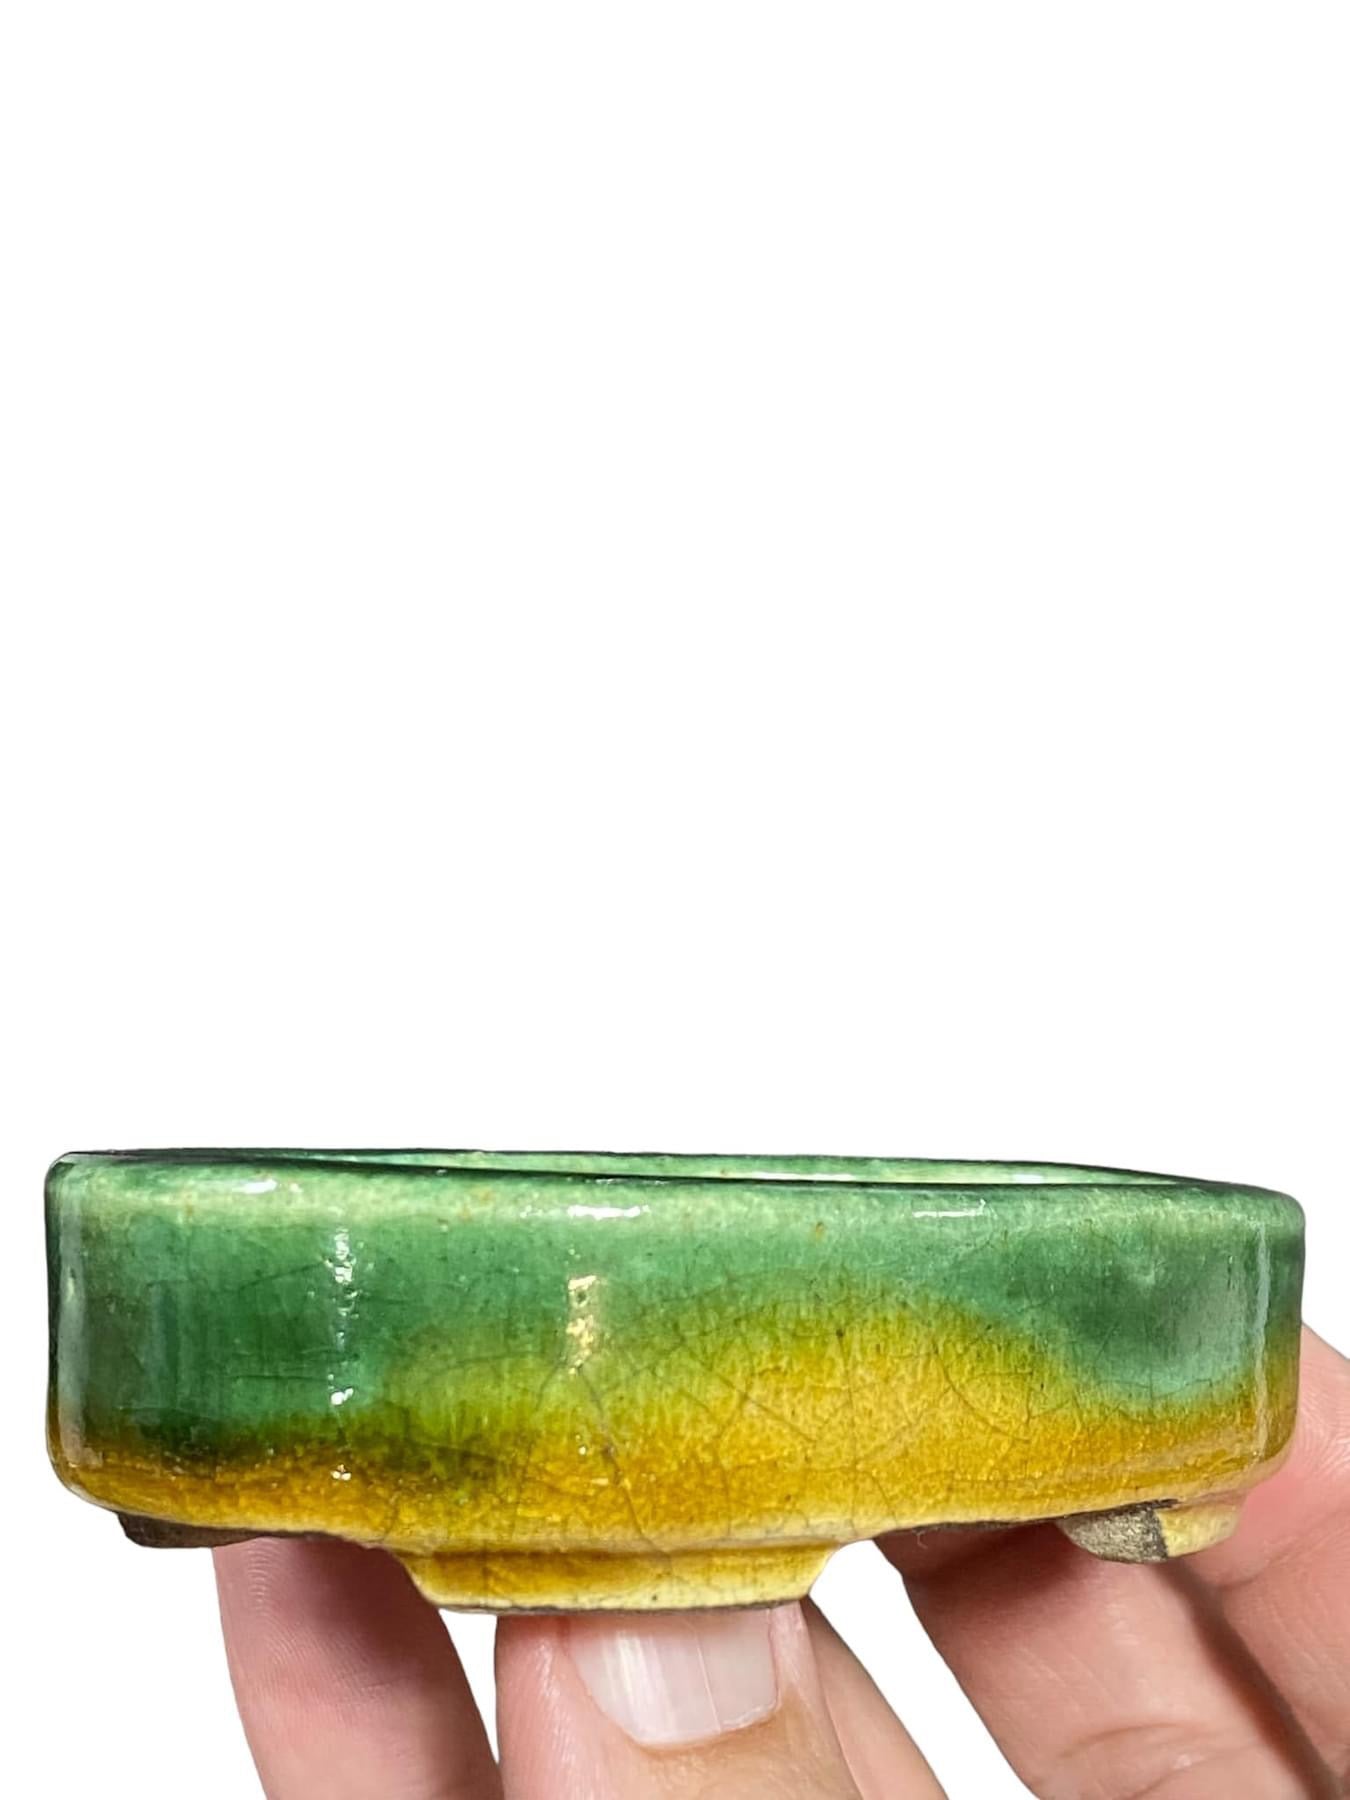 Satomi Terahata - Green and Yellow Crackle Oval Pot (3-3/4” wide)